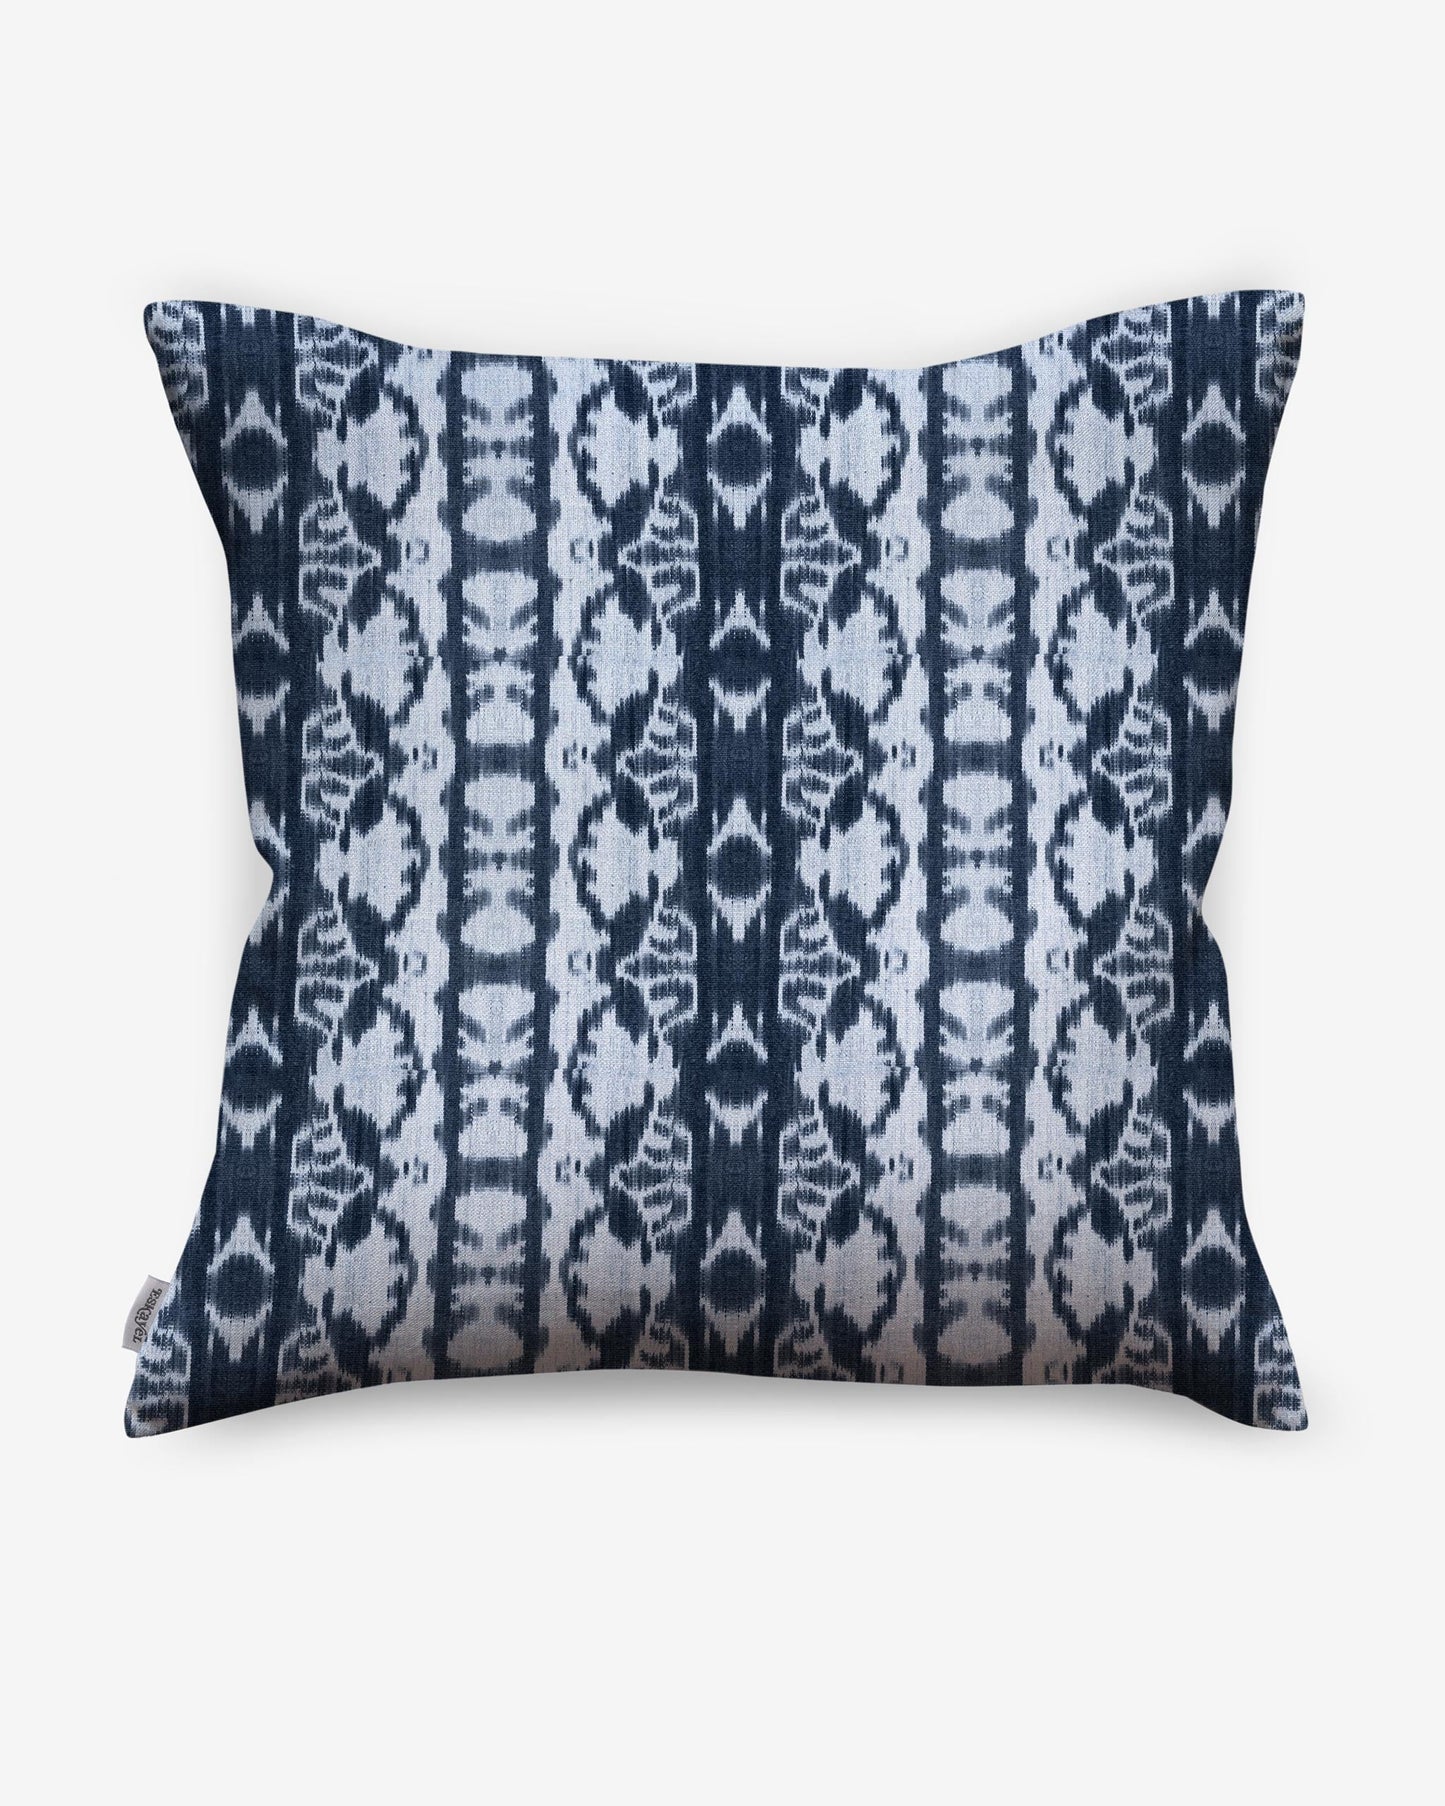 A blue and white Bali Stripe Pillow with an abstract Bali Stripe pattern